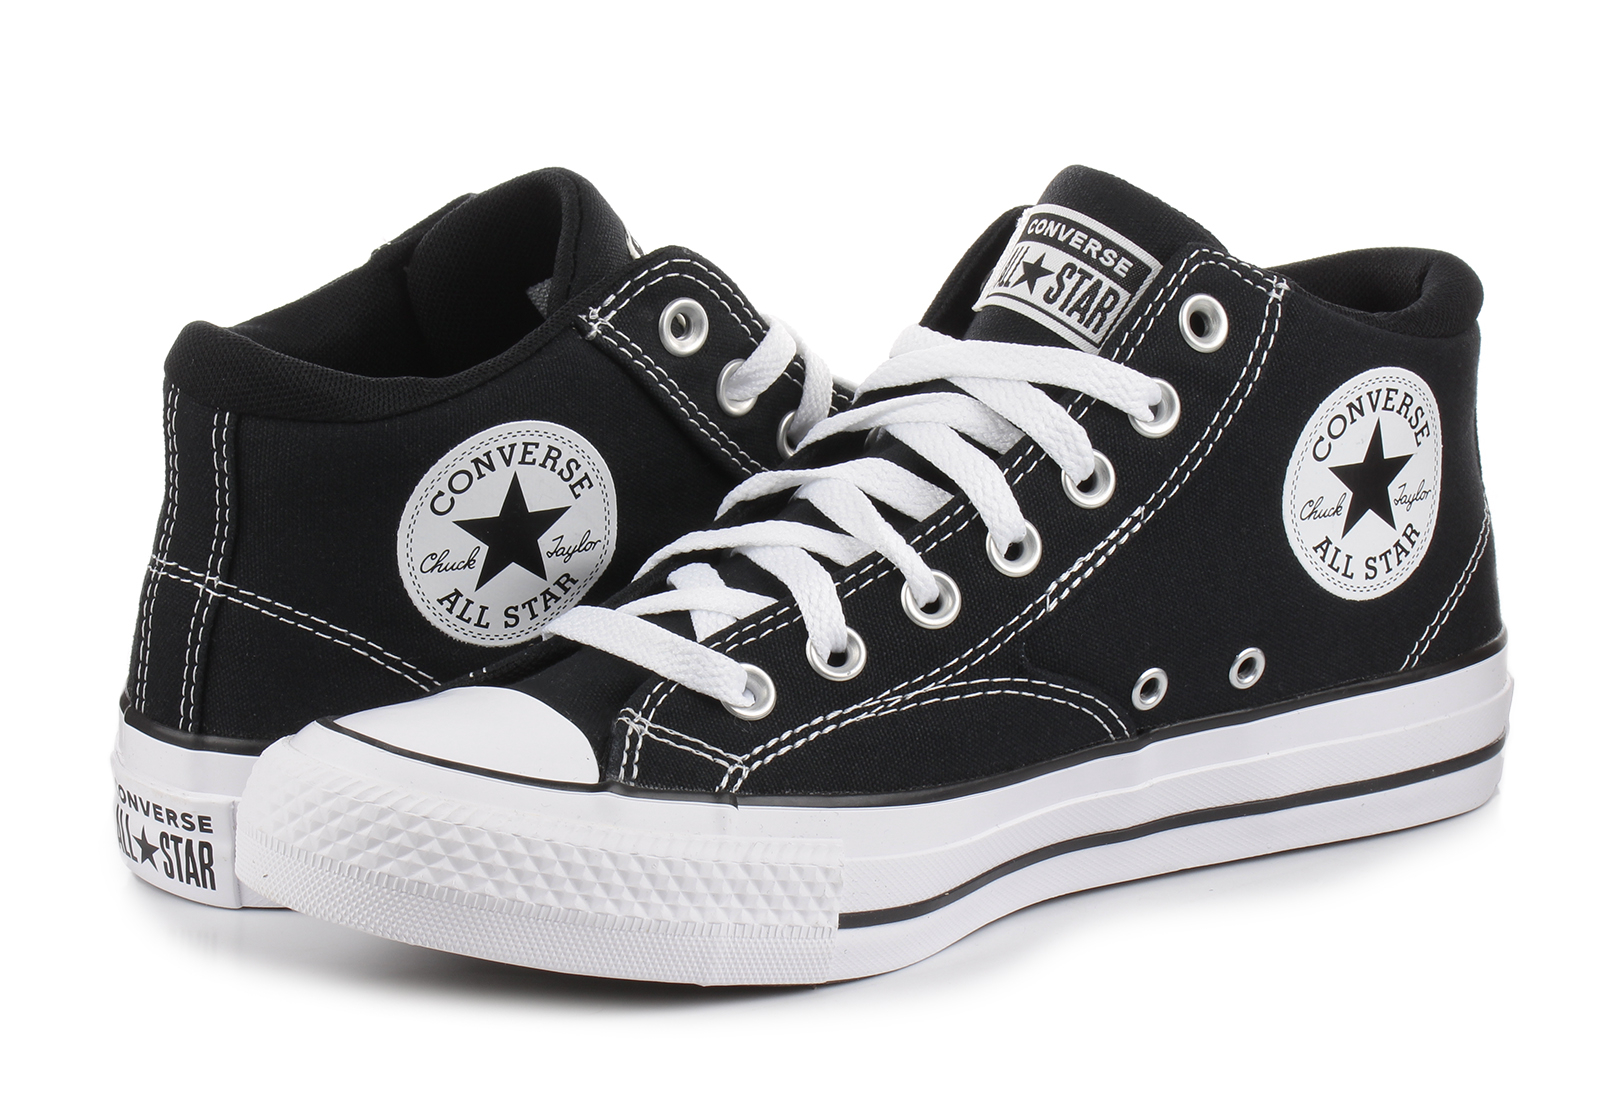 Star Malden boots Online Taylor shop Chuck A00811C shoes sneakers, - and - Street for - All Converse trainers High